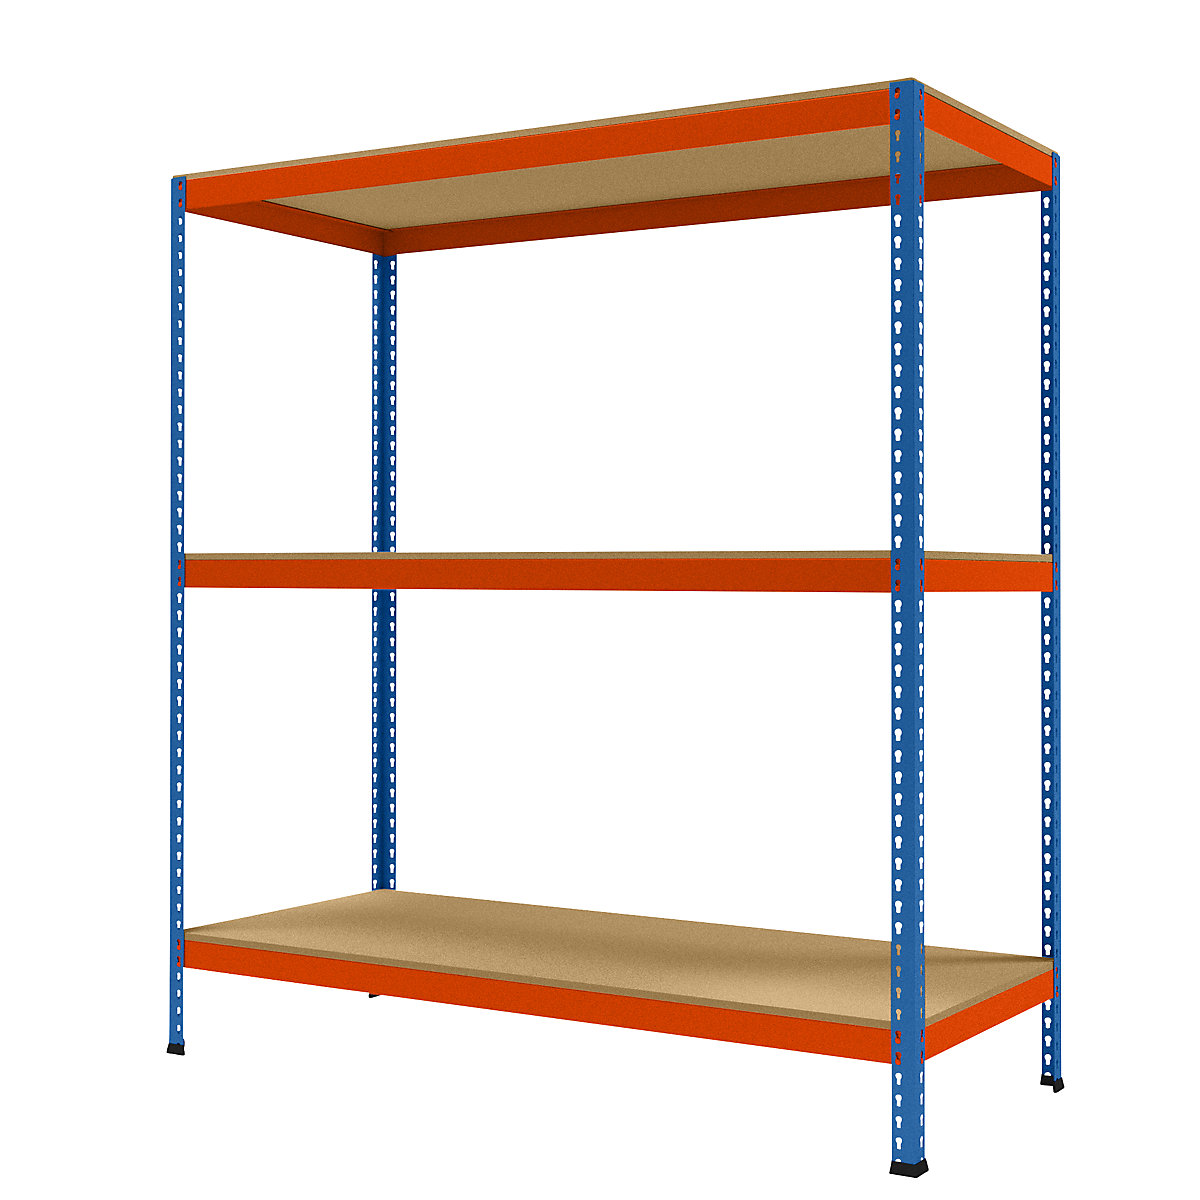 Wide span heavy duty shelving, height 1981 mm, overall depth 773 mm, width 1841 mm